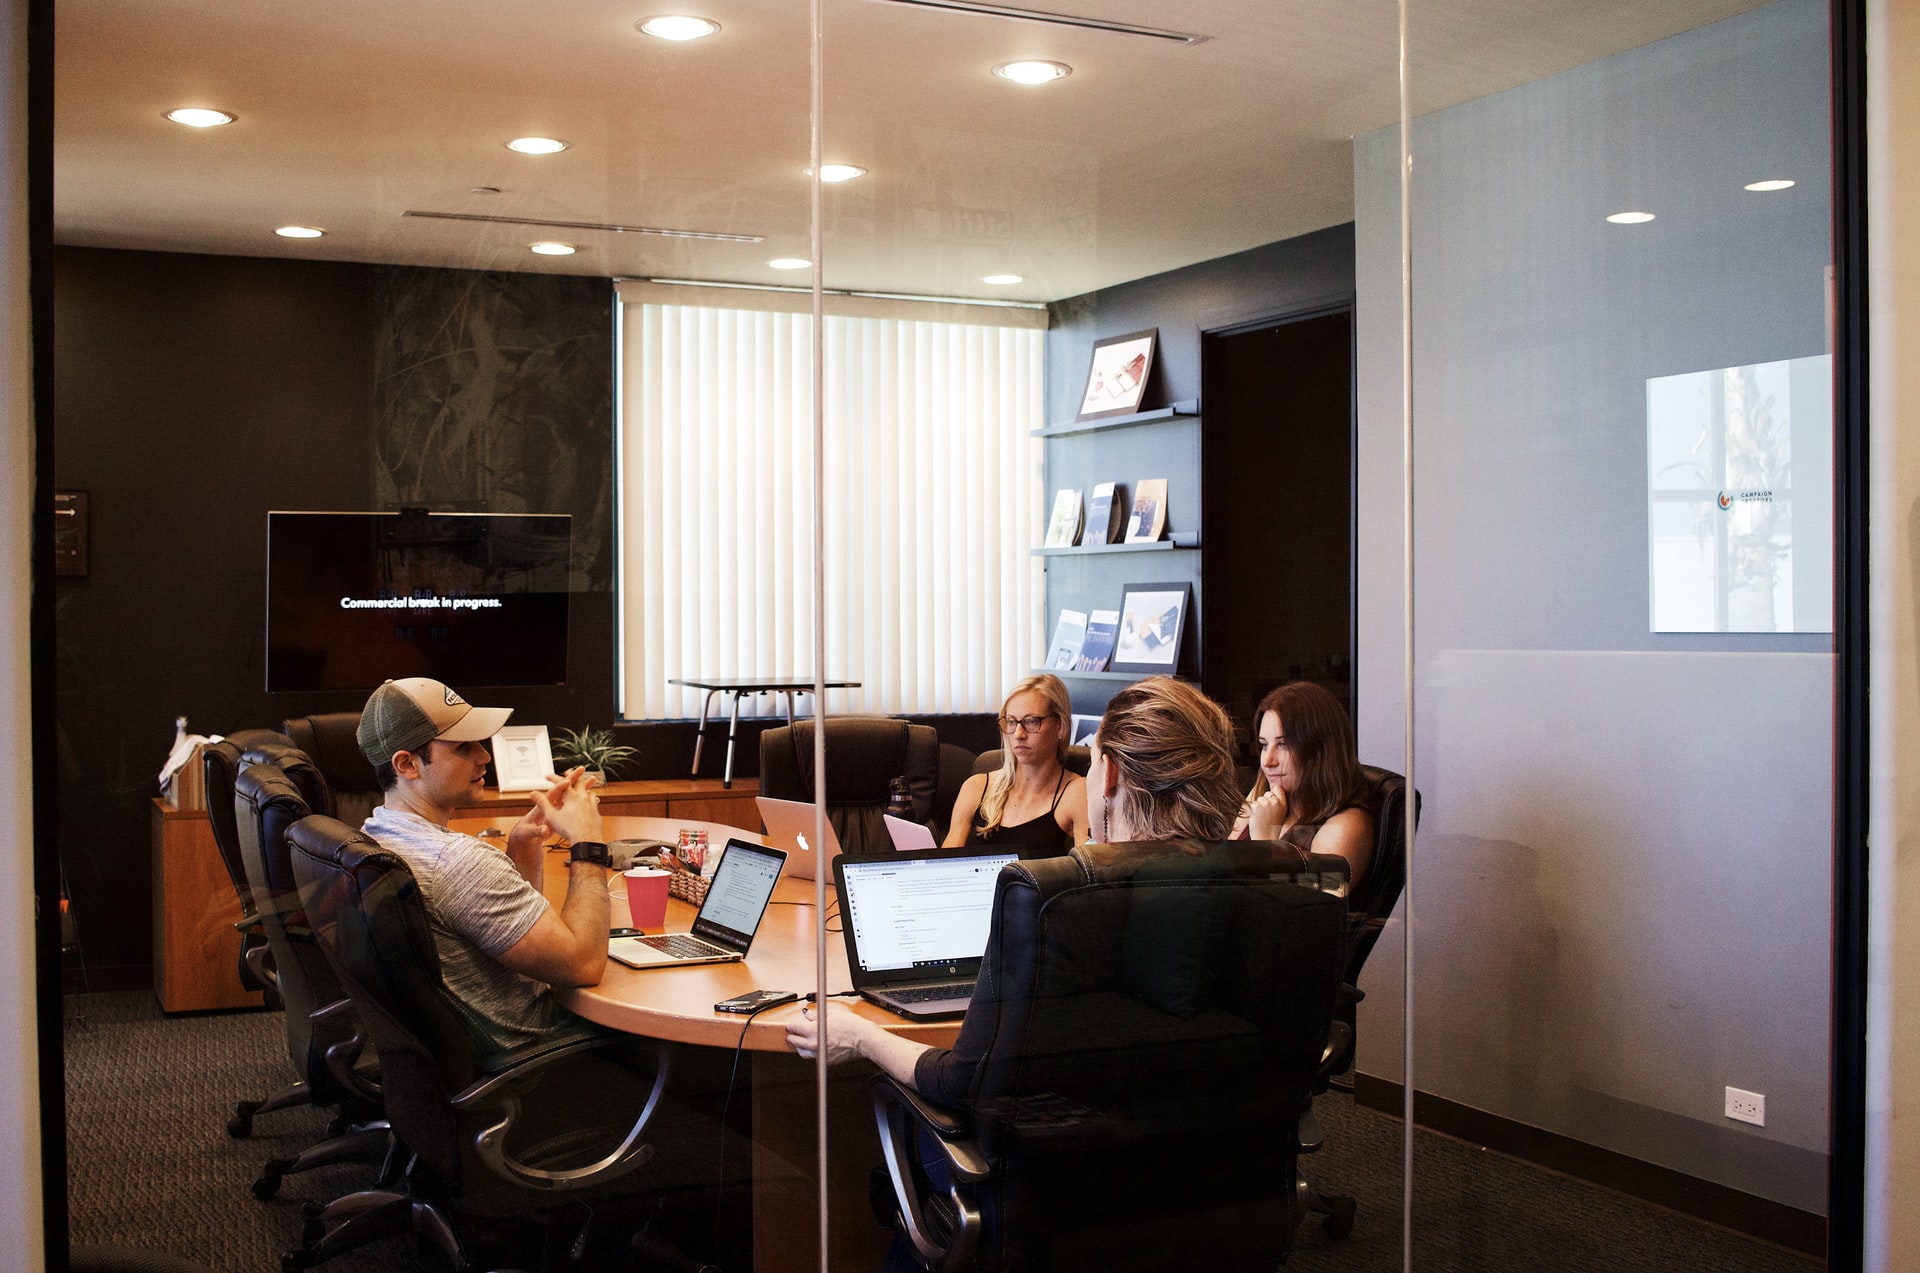 A group meeting in a conference room